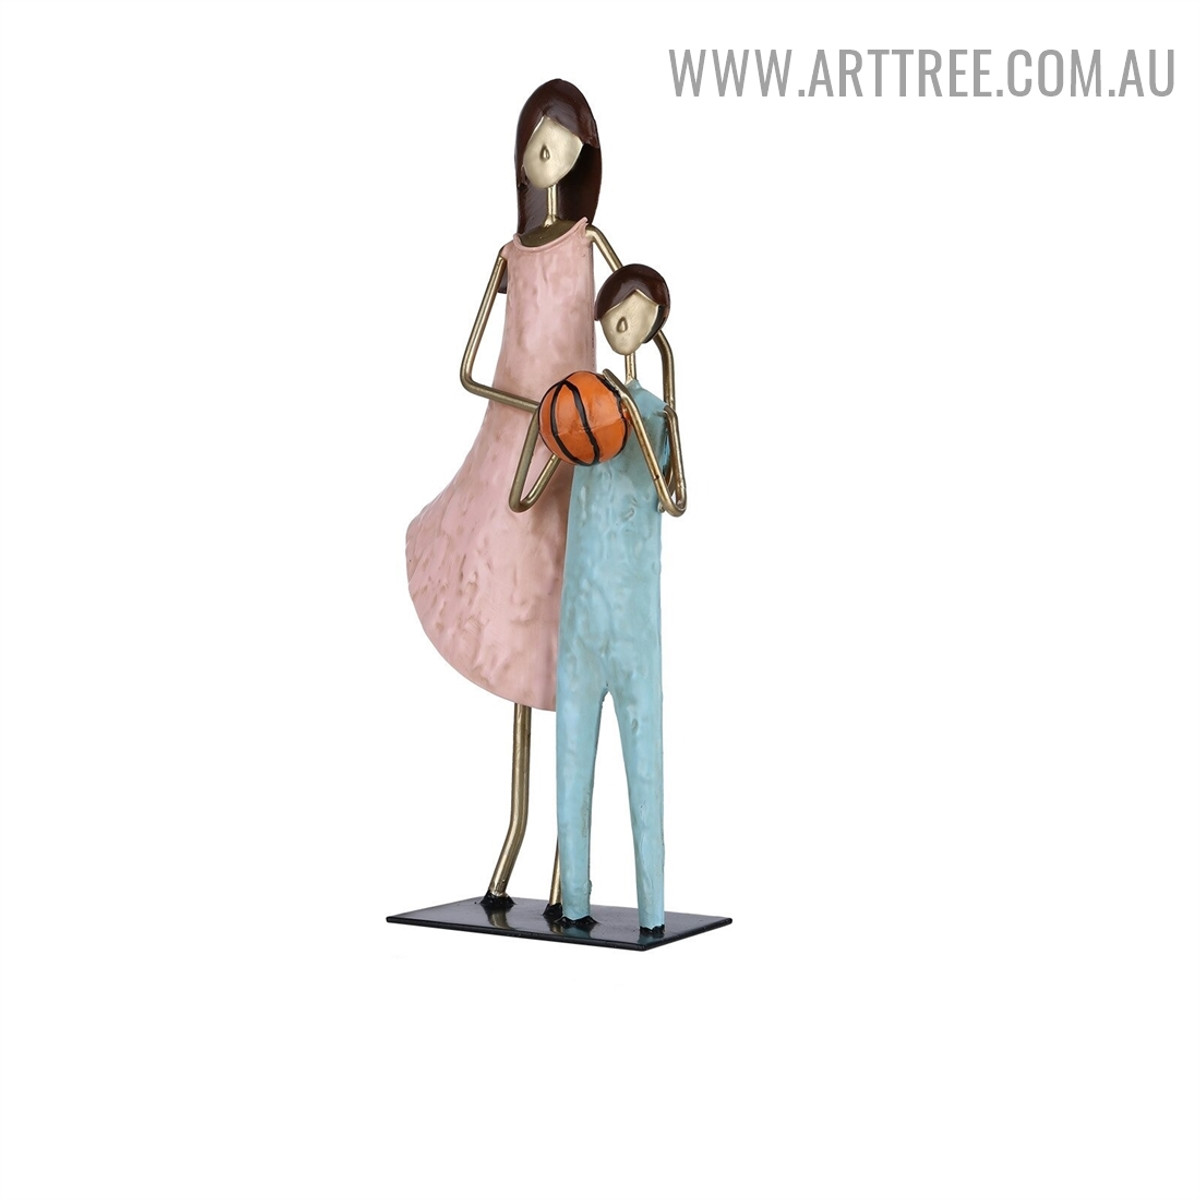 Brother and Sister Figurine Iron Material Modern Sculpture for Sale in Australia